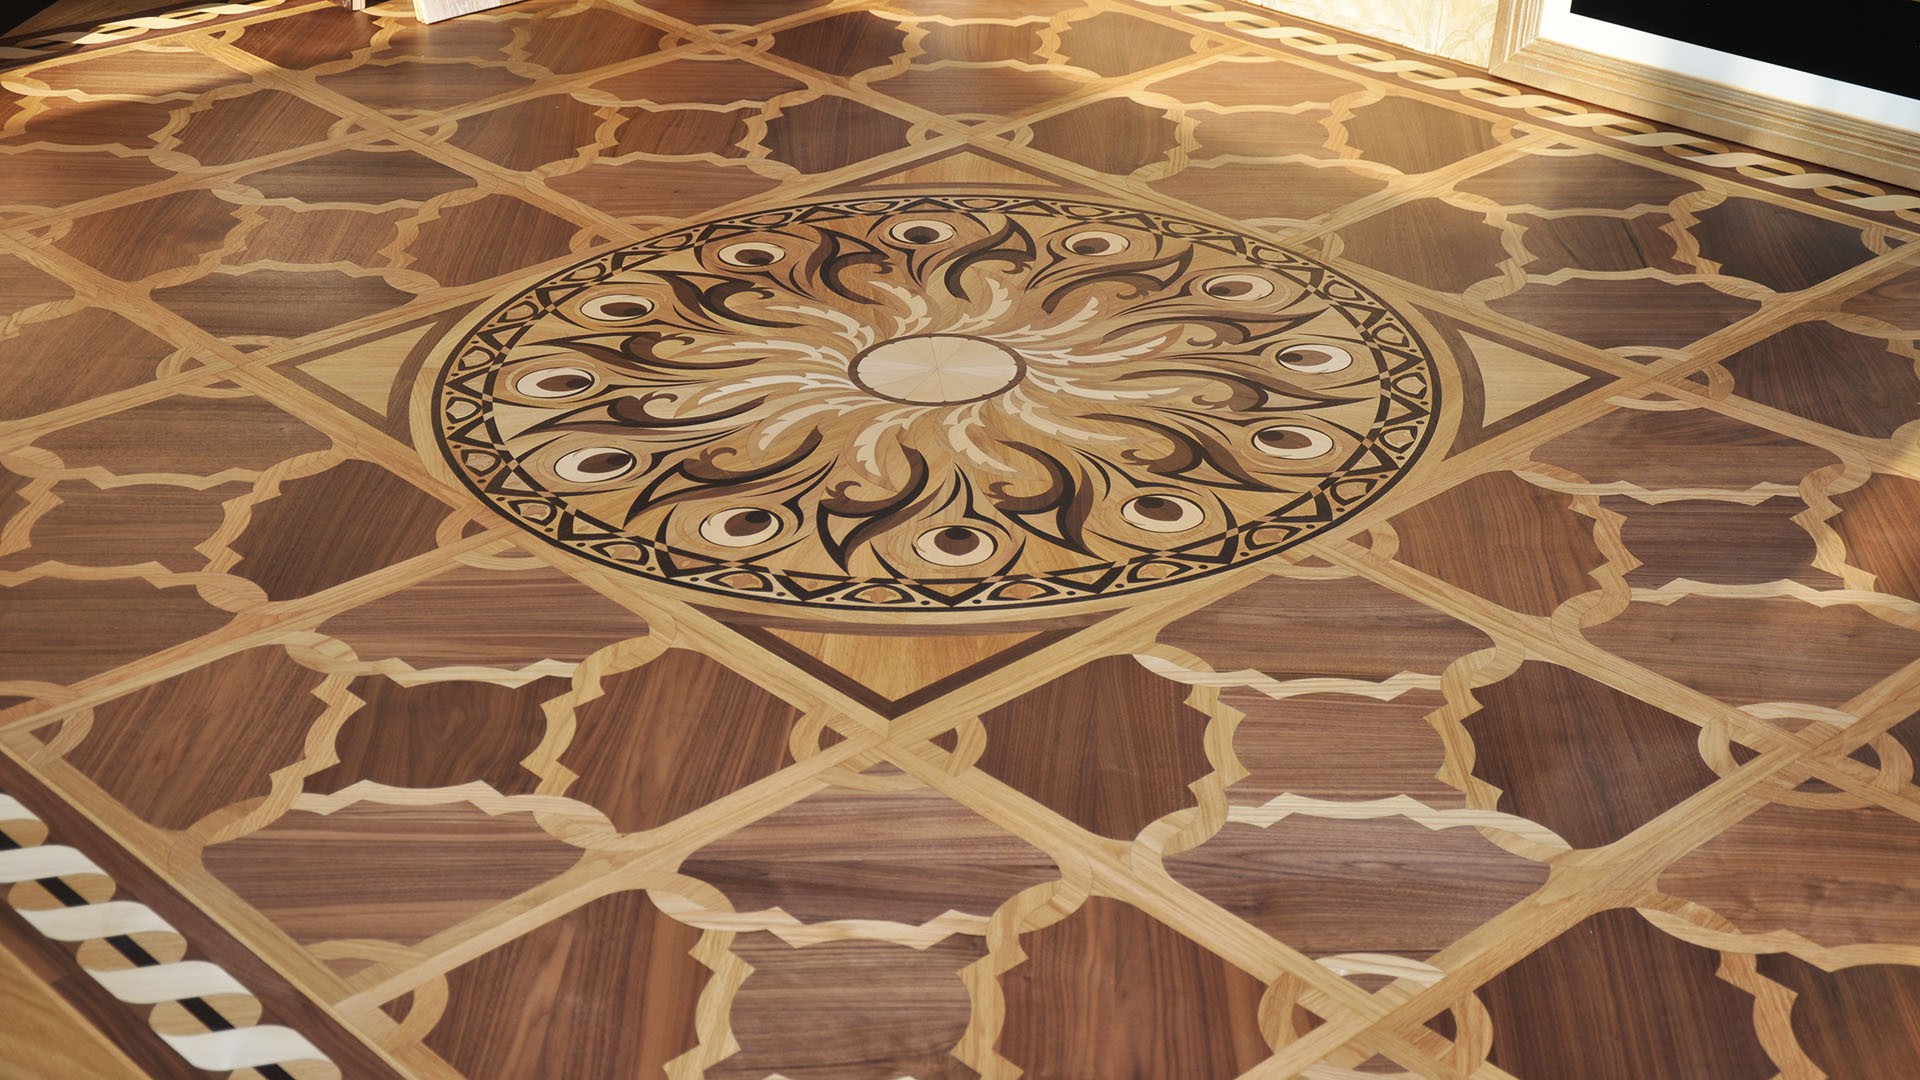 LUXURY WOOD FLOORING - Unique designs, Marquetry & Style, London's